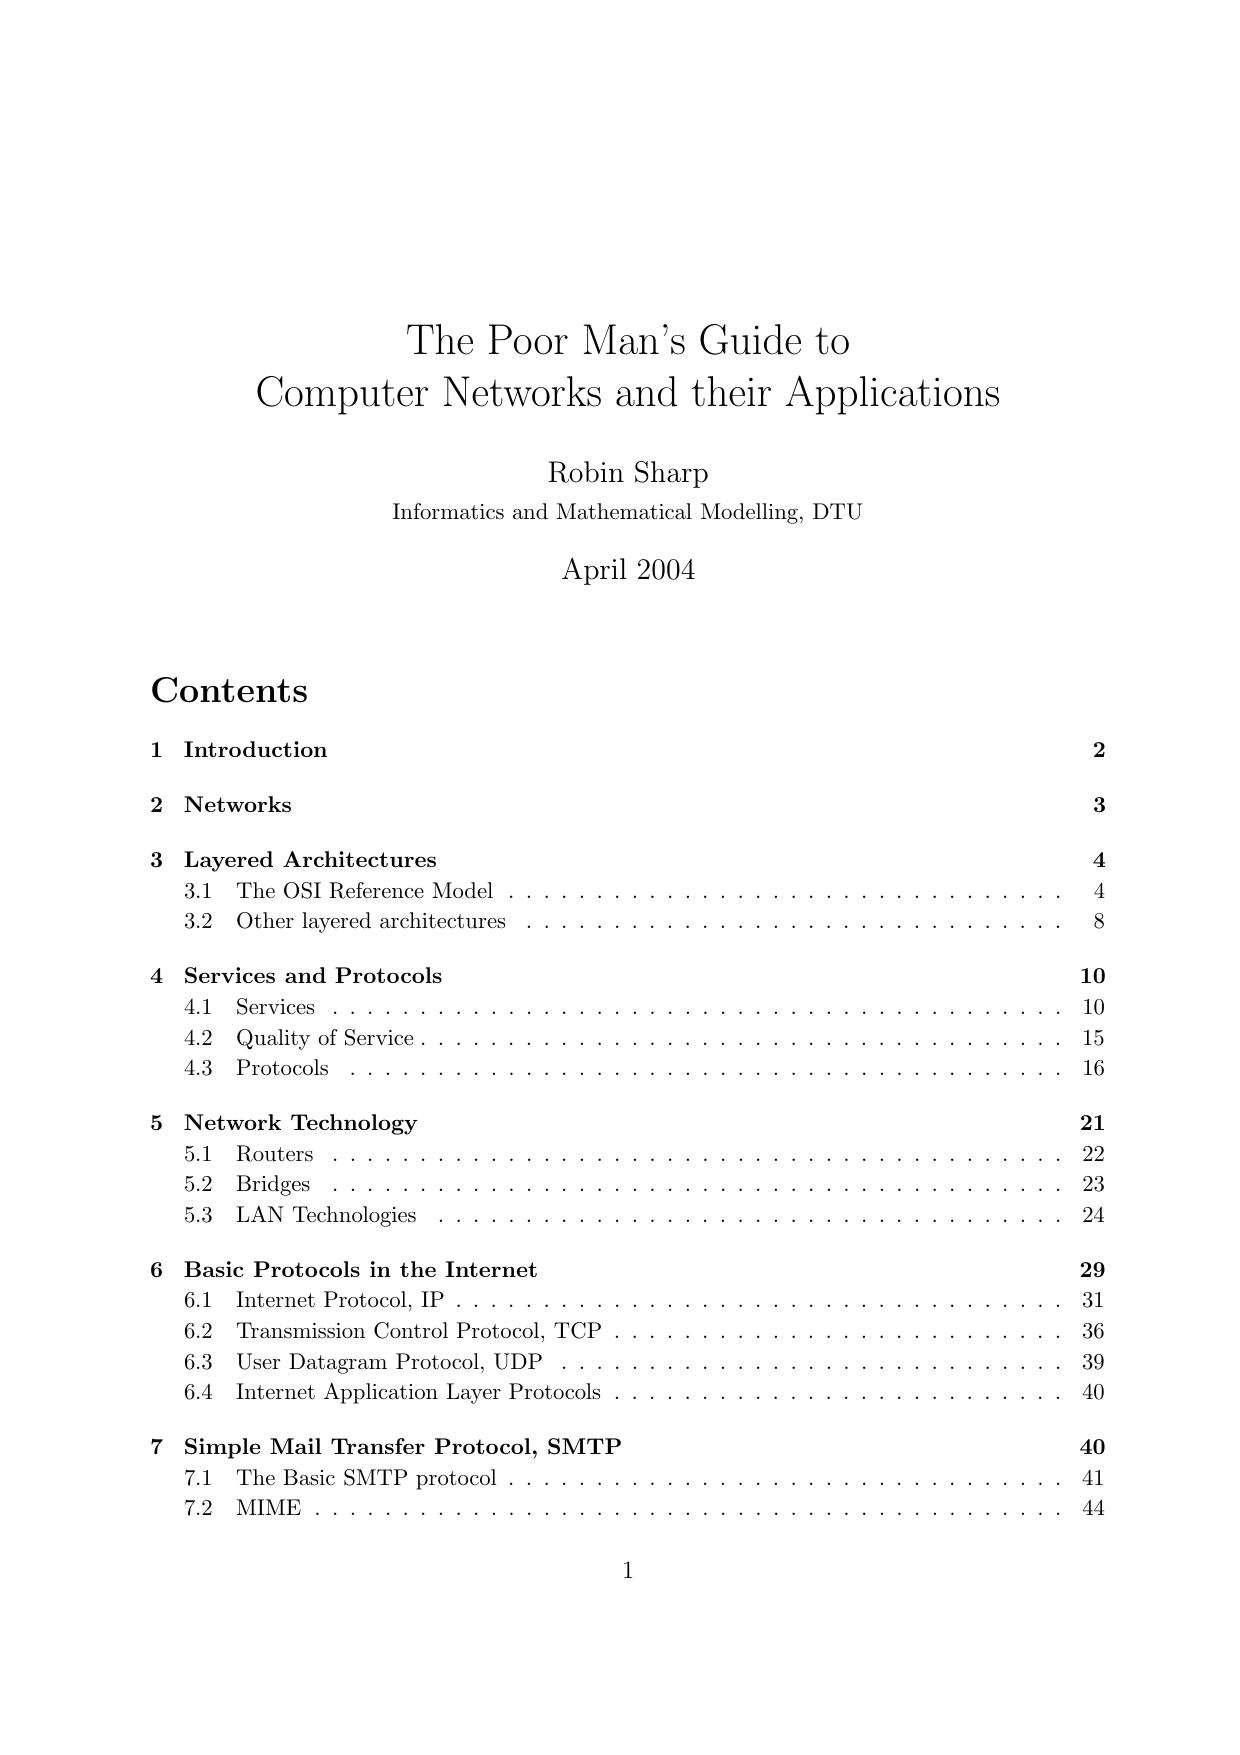 The poor mans guide to computer networks and their applications